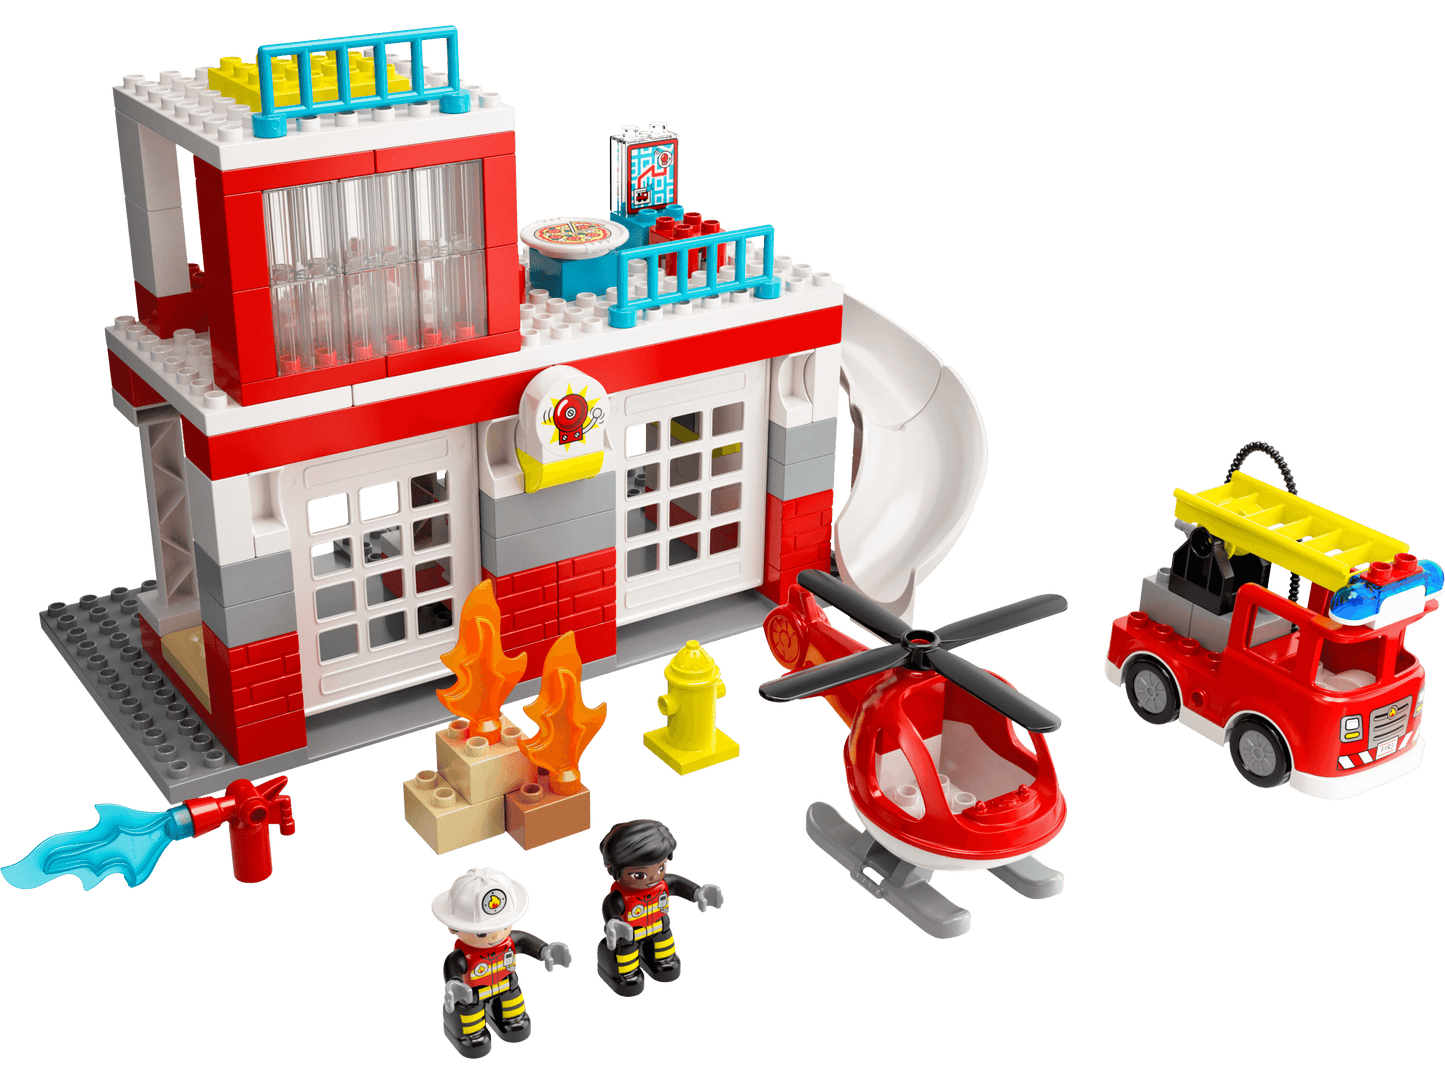 LEGO DUPLO Rescue Fire Station & Helicopter 10970 Building Set - 117 Pieces